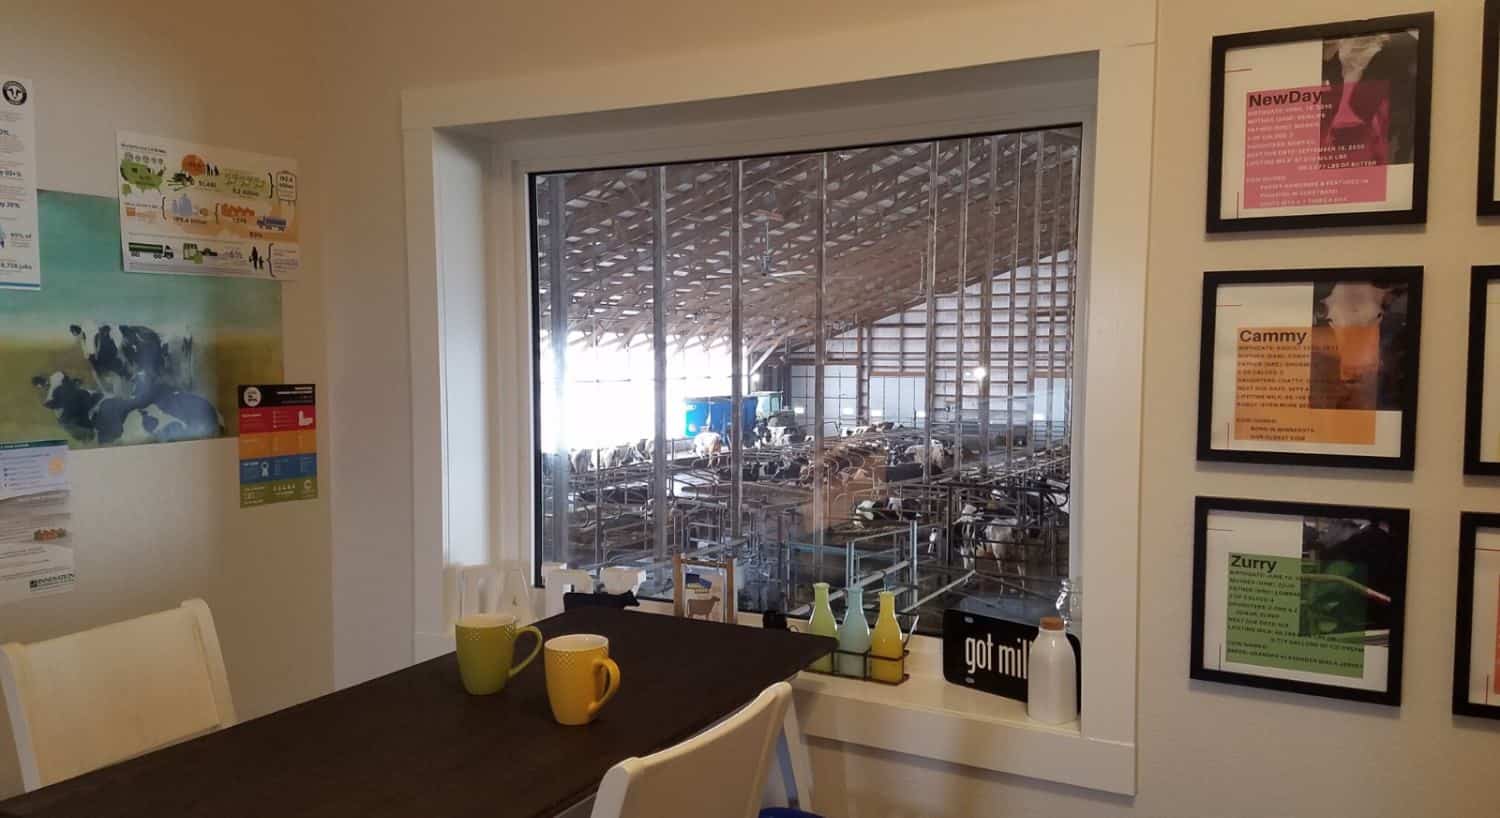 Room with a wooden table and chairs with a window overlooking dairy cow operations